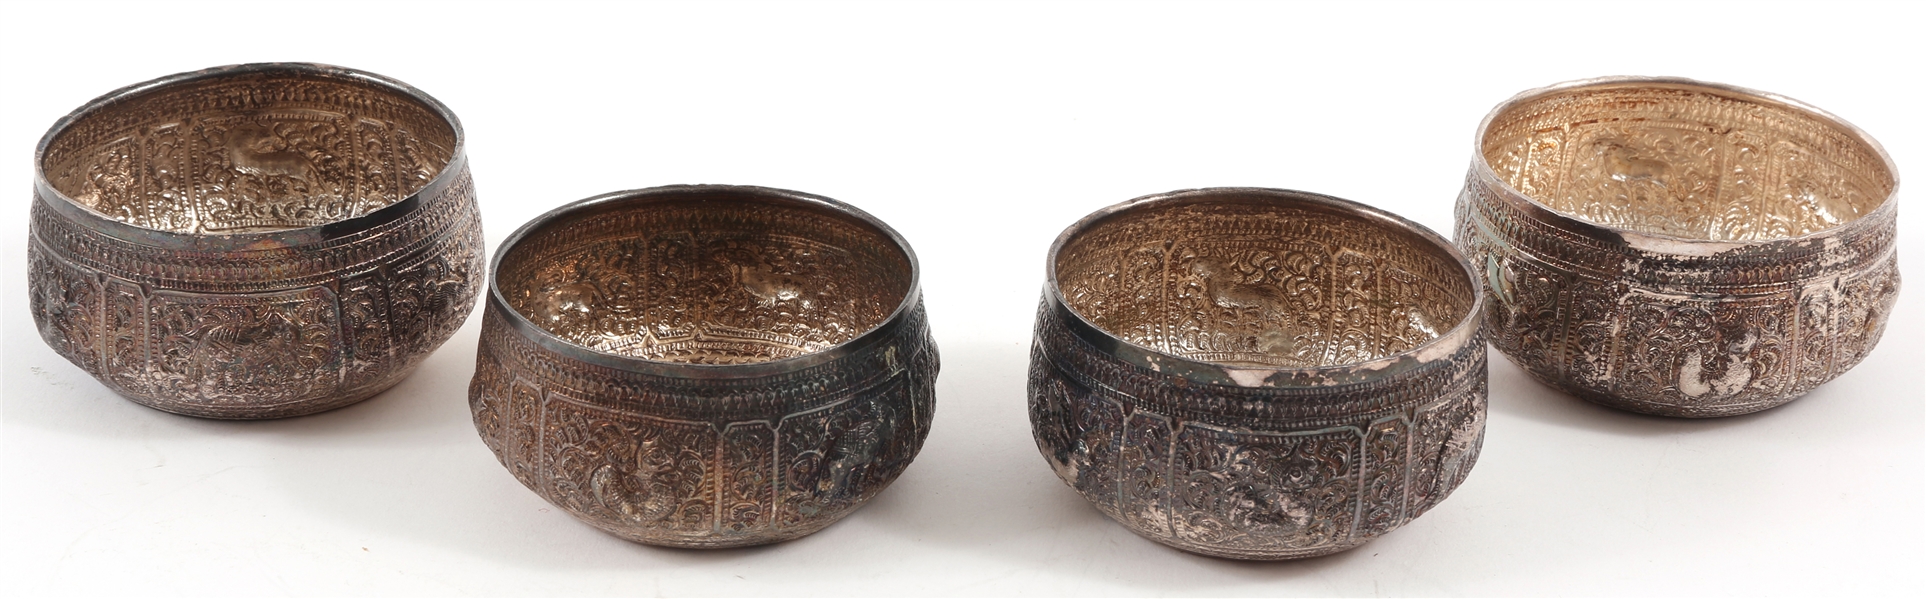 HAND CHASED BOWLS TADA .900 SILVER